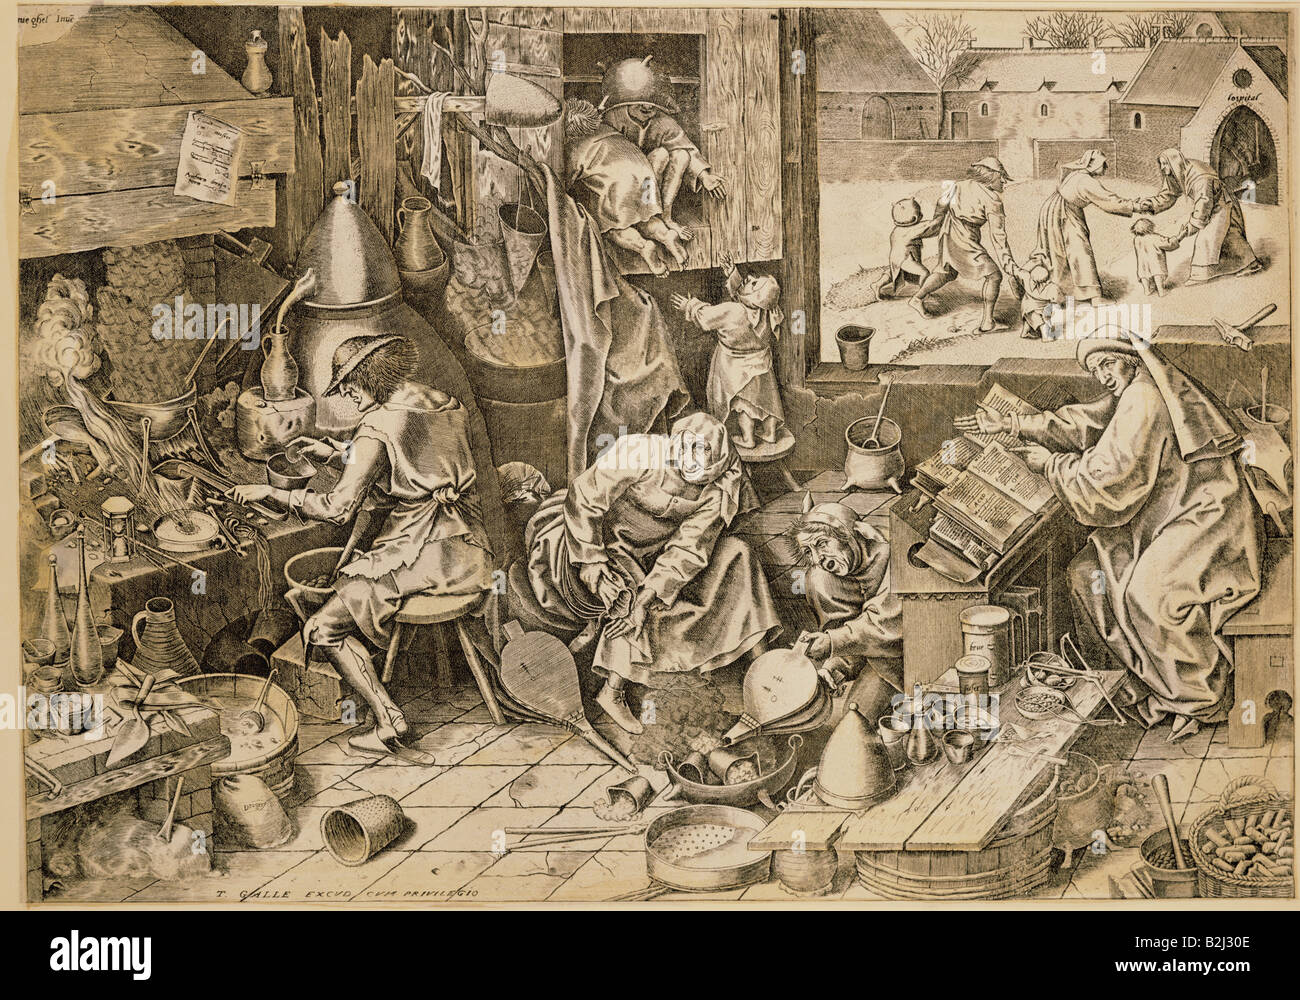 alchemy, allegory, the making gold brings the ruin, copper engraving by Theodor Galle after painting by Pieter , Artist's Copyright has not to be cleared Stock Photo